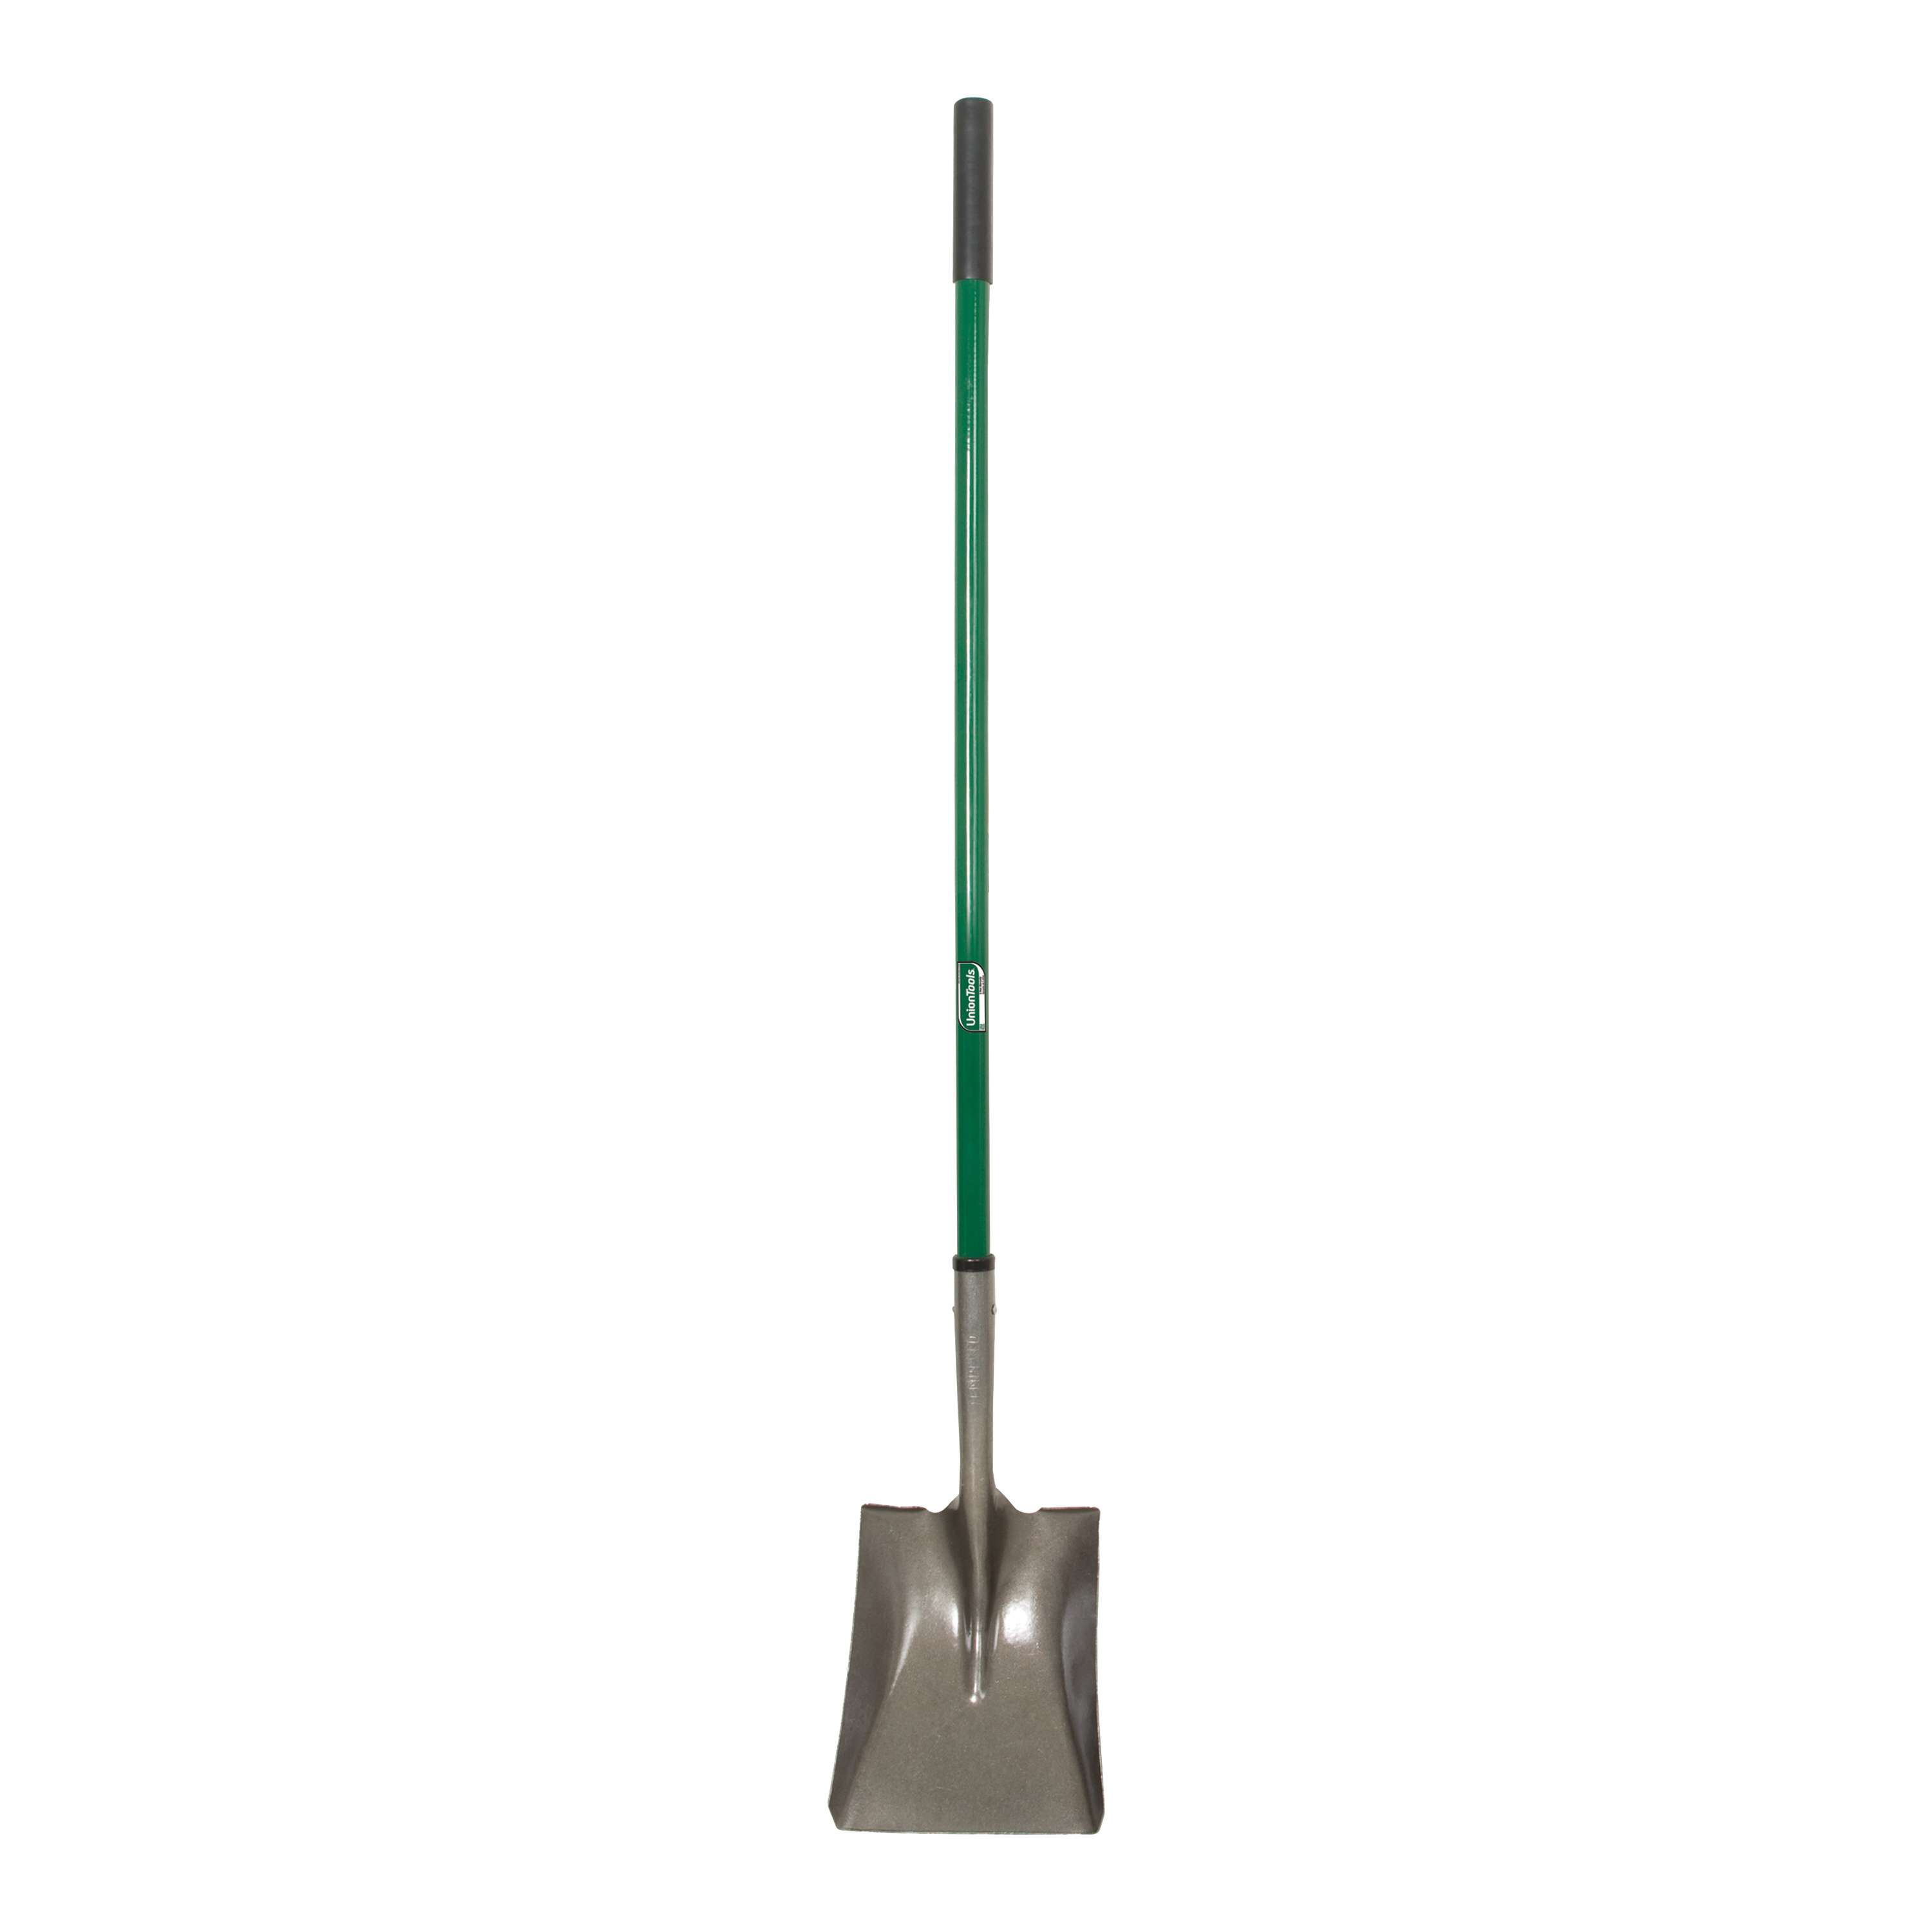 2432100 Square Point Shovel, 8.61 in W Blade, Steel Blade, Fiberglass Handle, 43 in L Handle